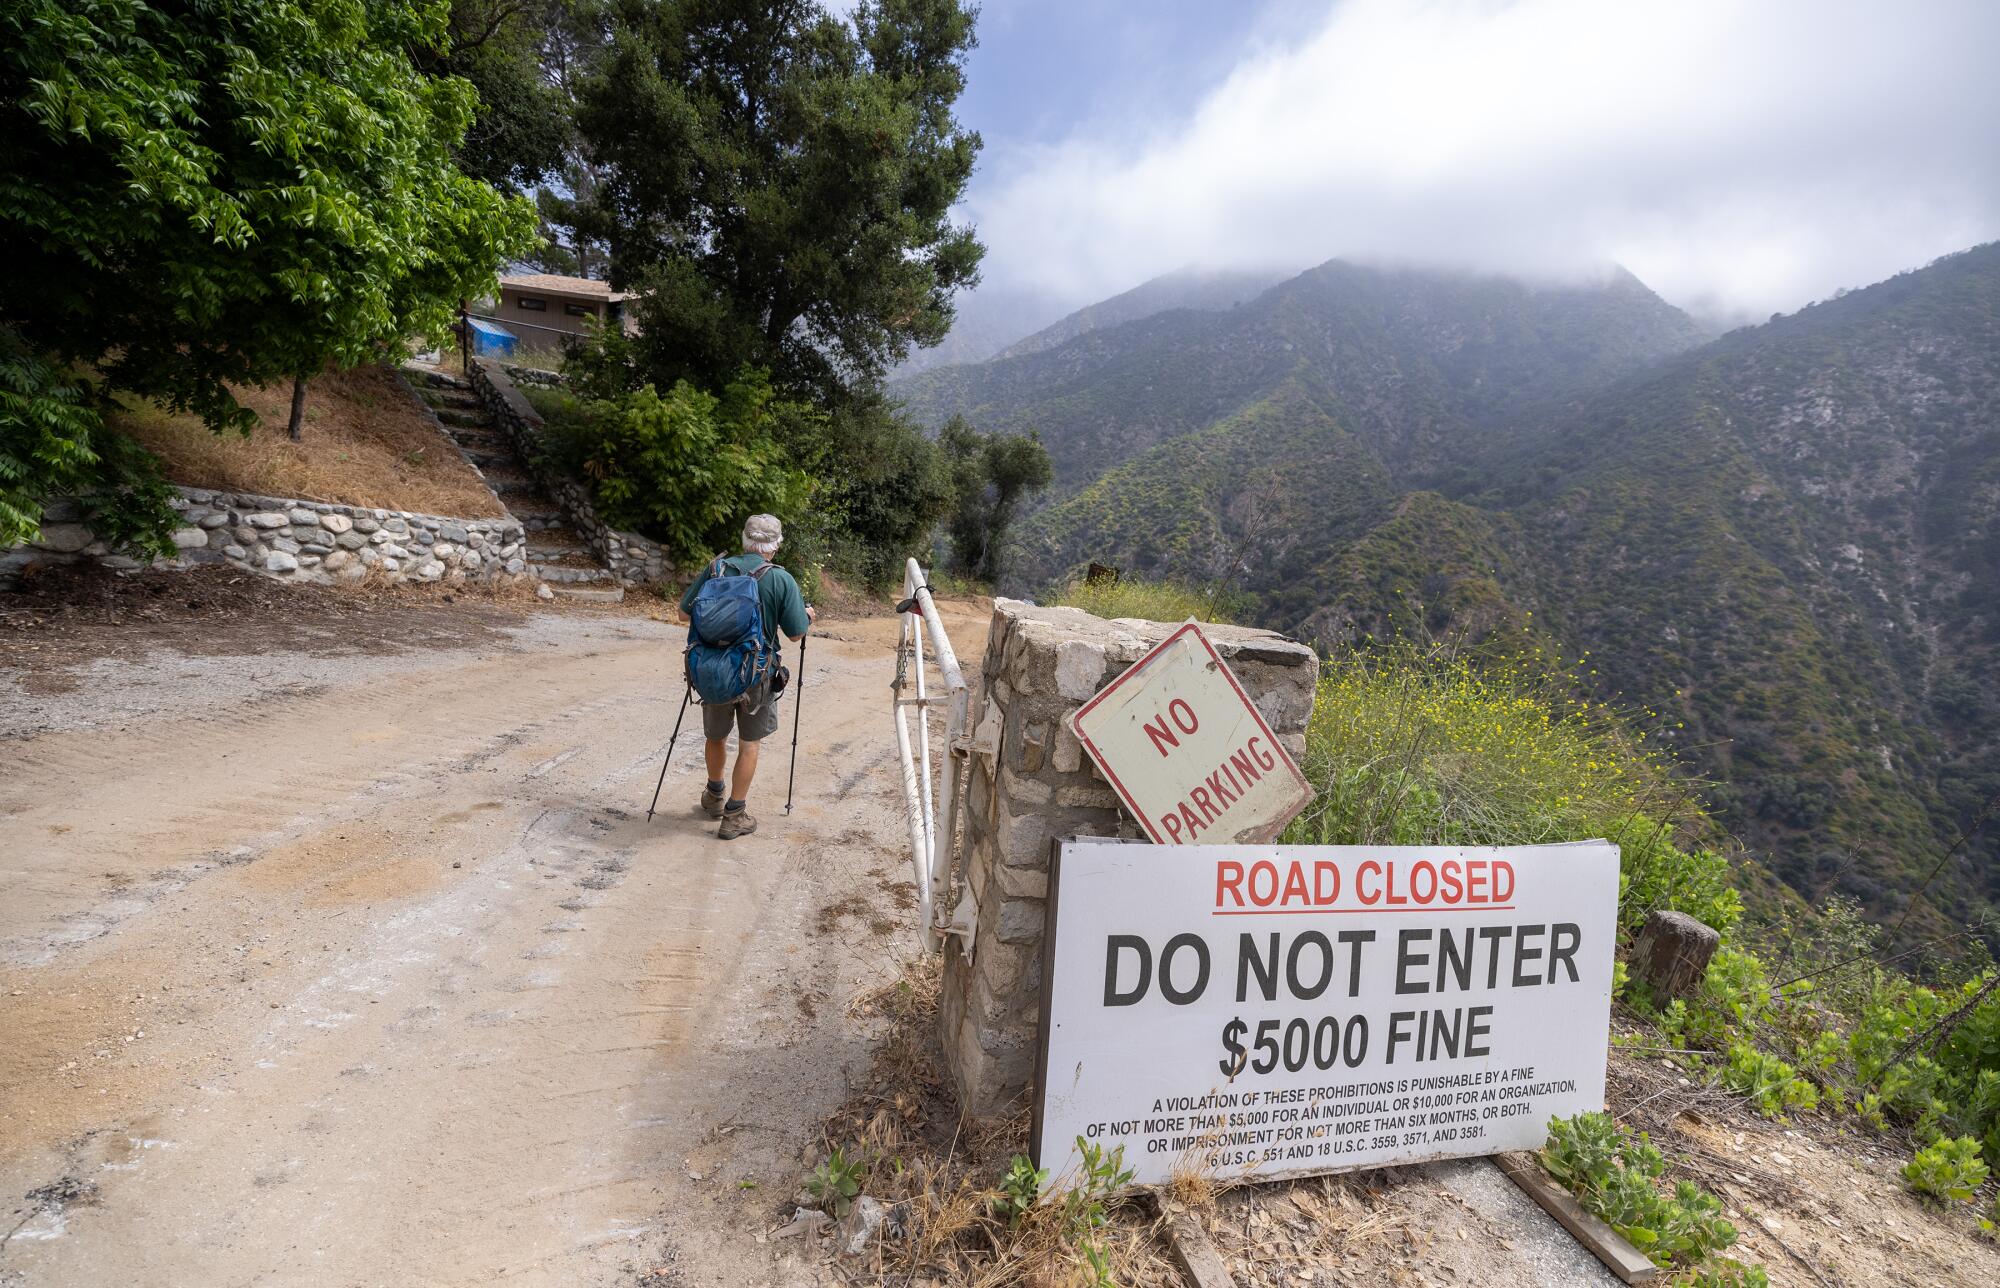 Chris Kasten hikes past a "Road Closed" sign along the trail from Chantry Flat toward Sturtevant Falls.